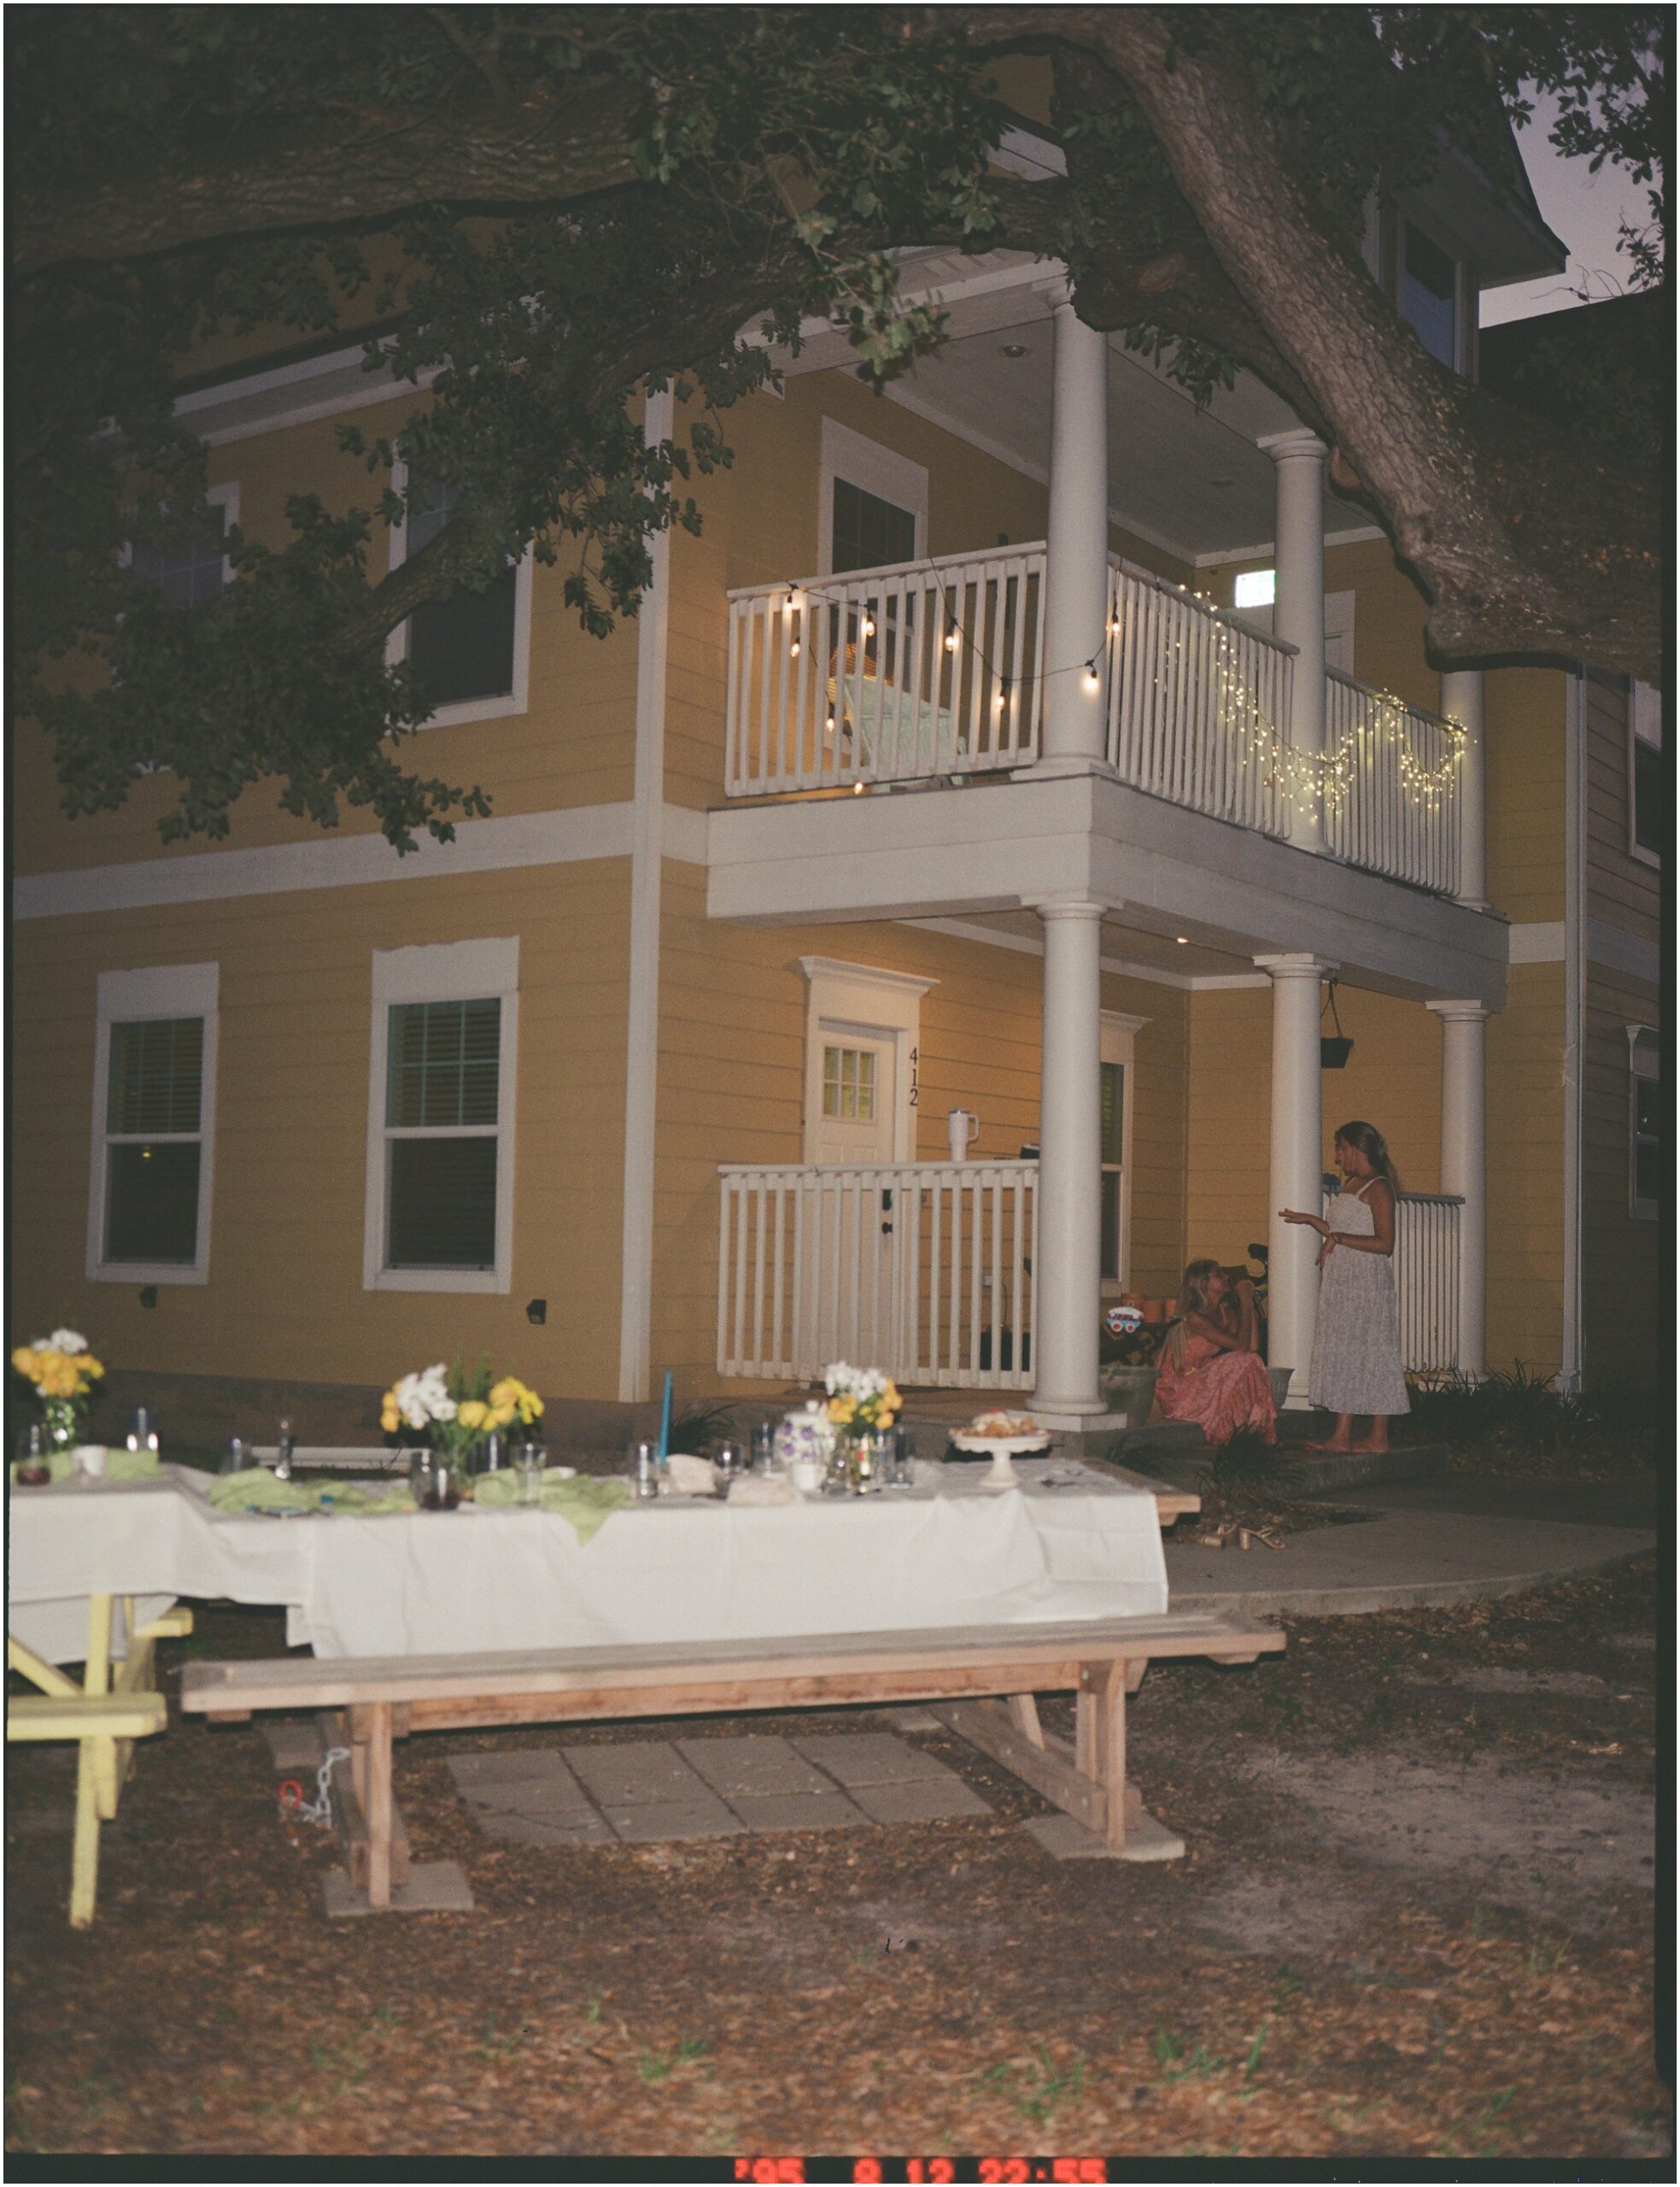 Yellow house with dinner table in front yard set of a birthday dinner on 120mm film